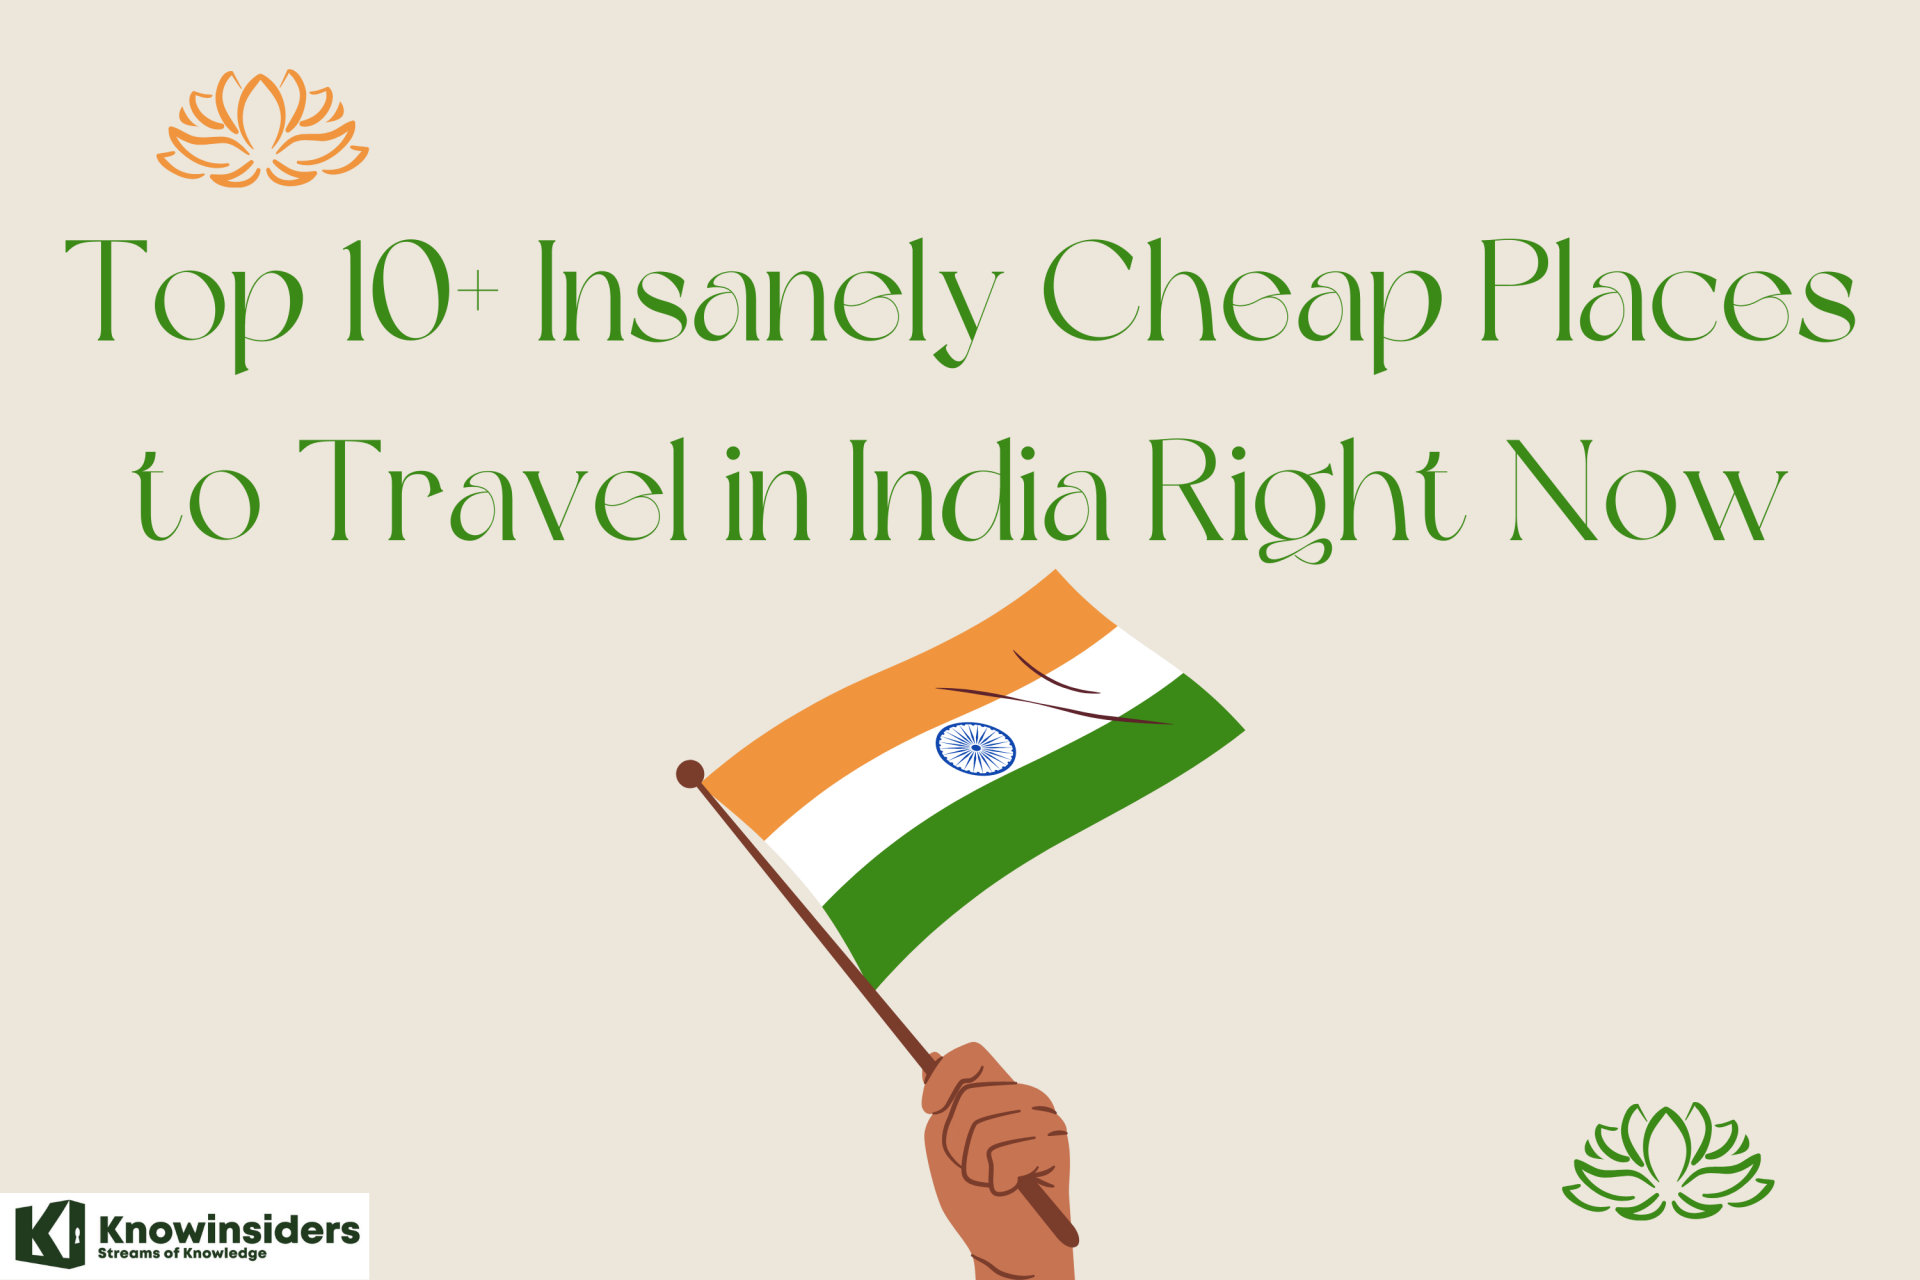 Top 10 Insanely Cheapest Places to Travel in India Today